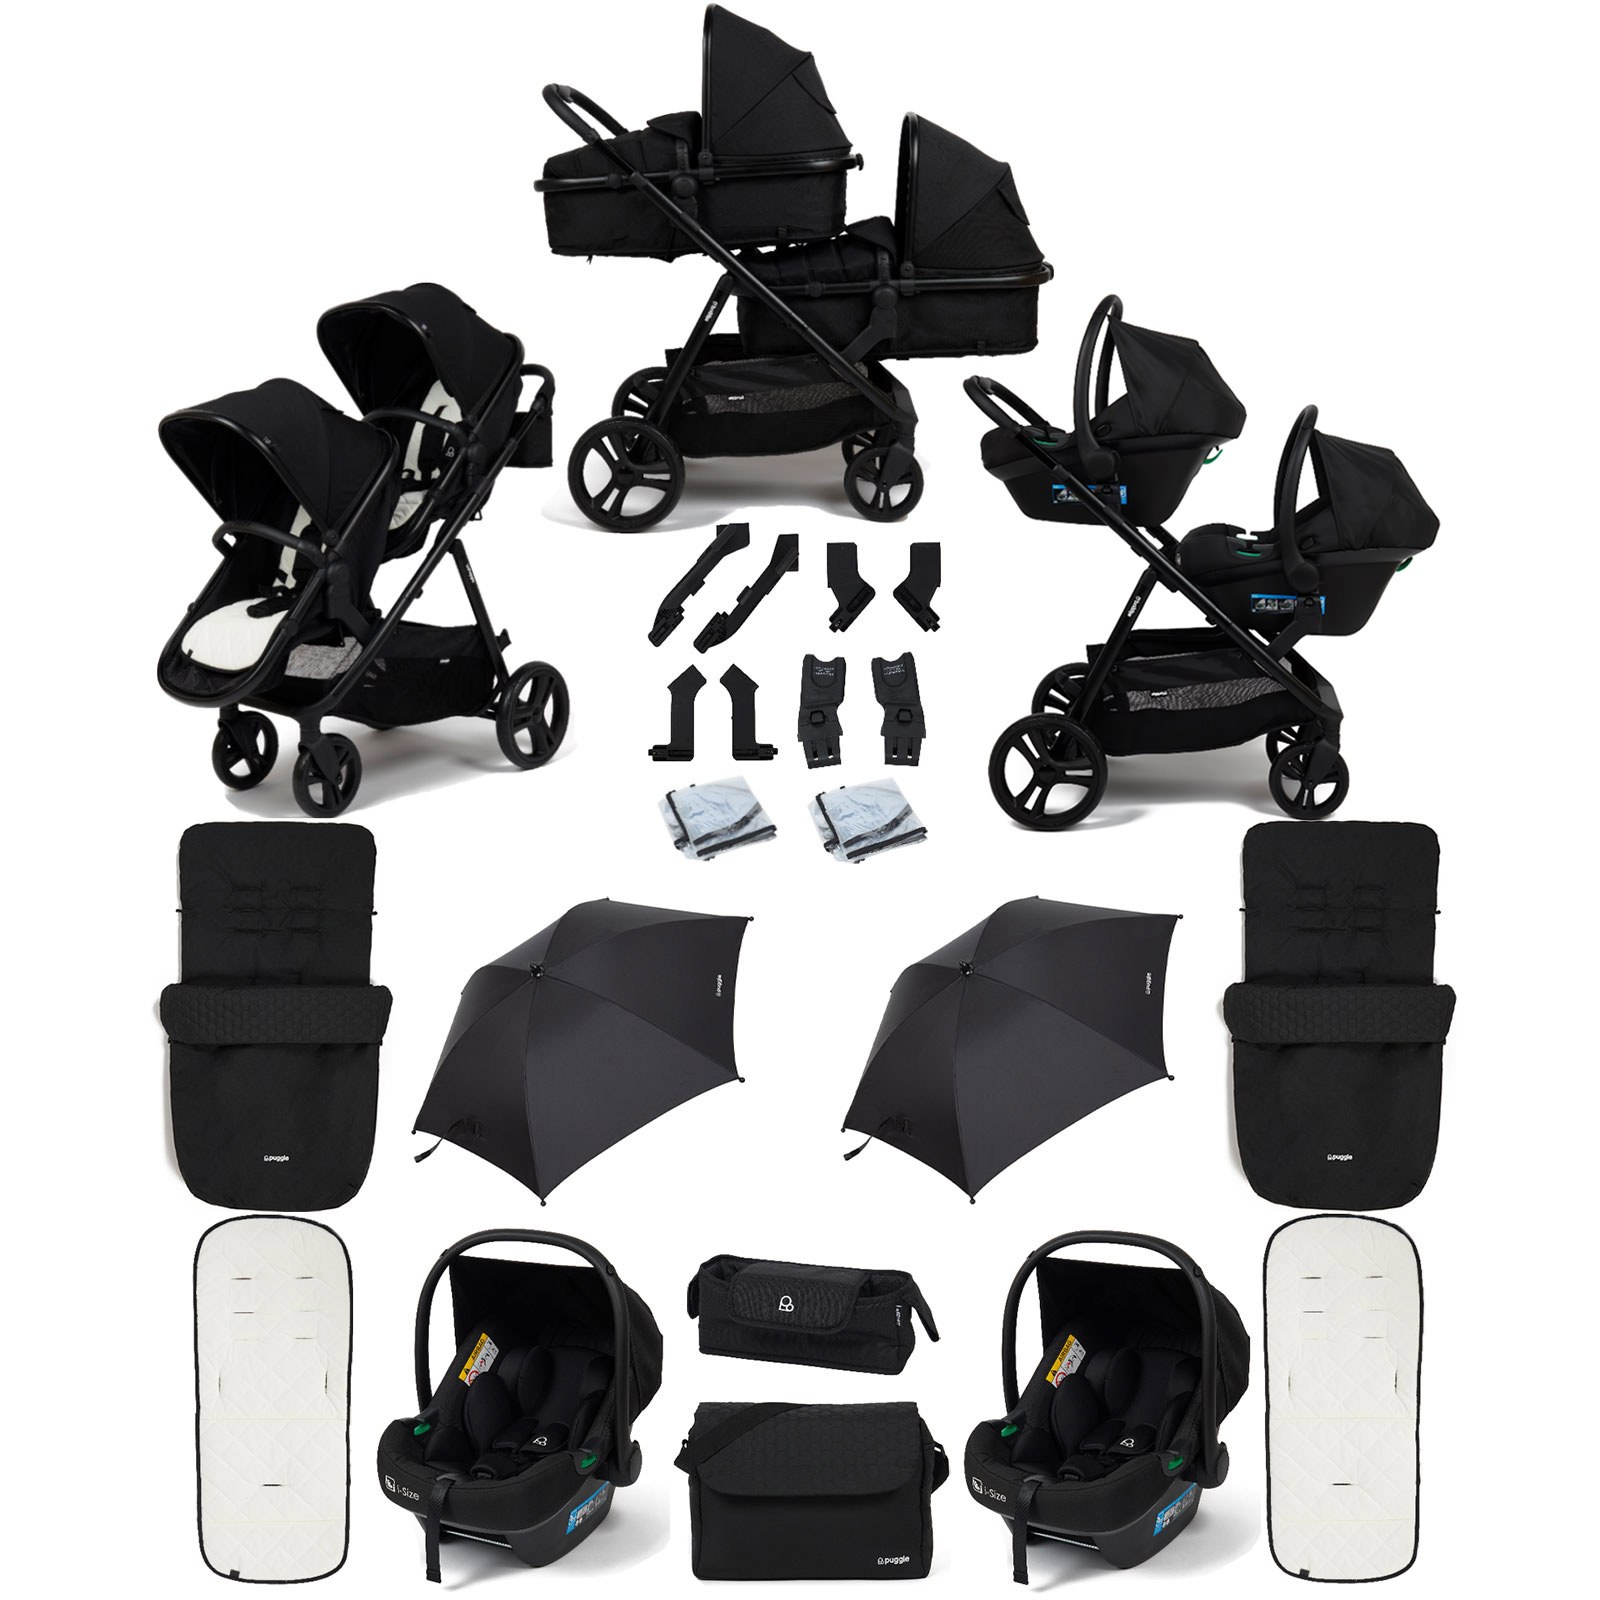 Puggle Memphis 2-in-1 Duo Double Travel System with 2 i-Size Car Seats, 2 Footmuffs, 2 Parasols, and Changing Bag - Midnight Black